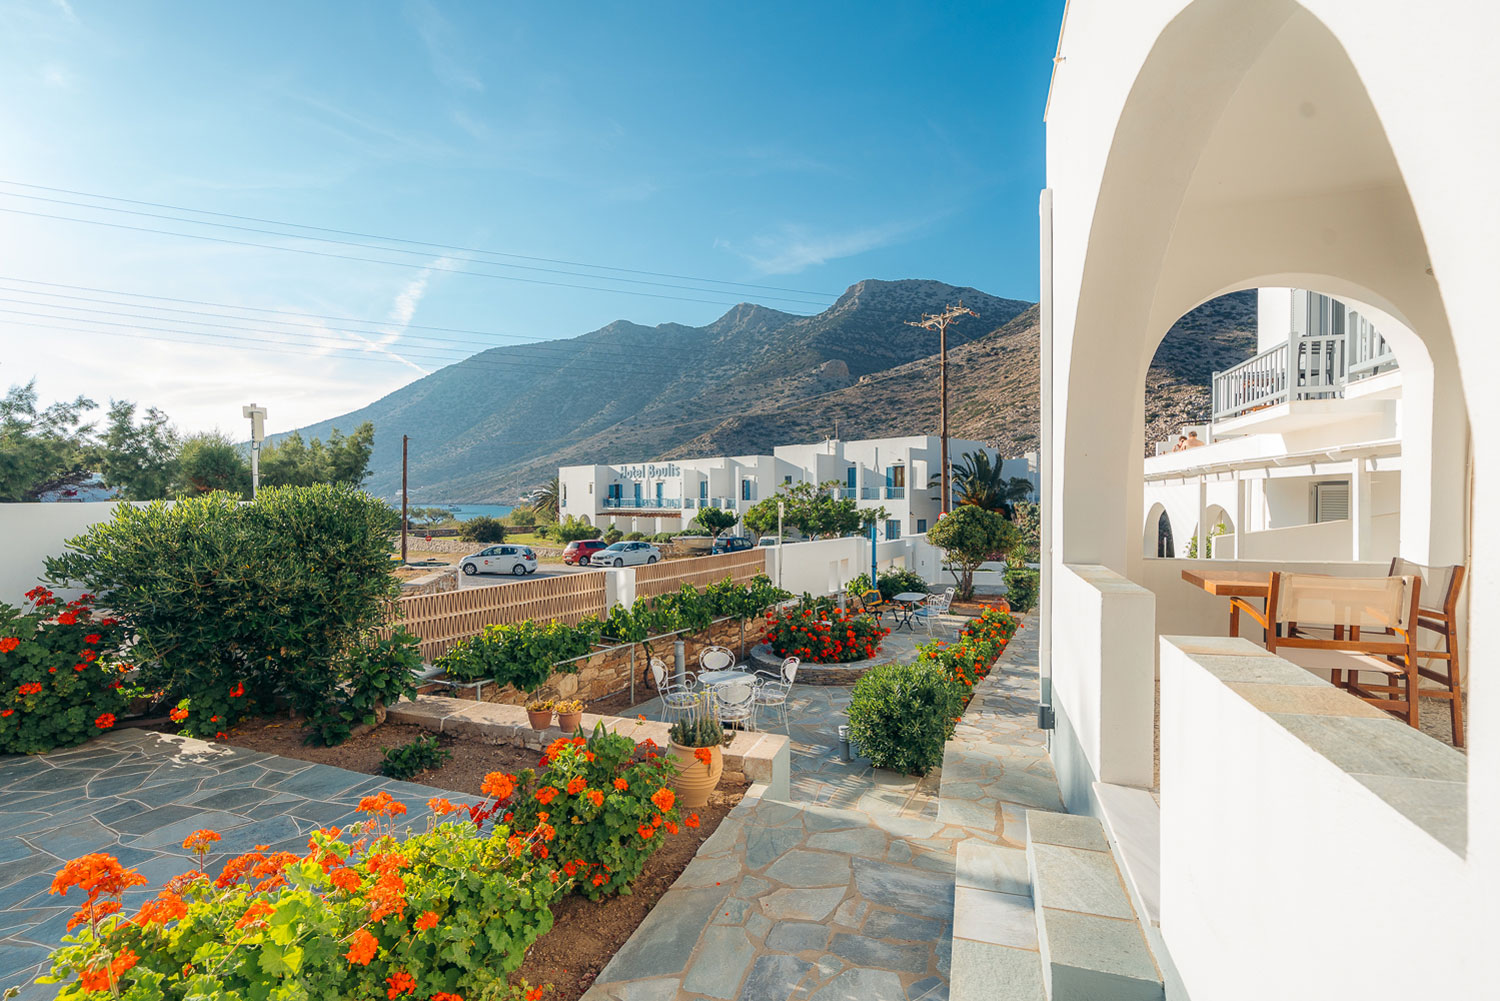 The garden of Aeolos apartments at Sifnos